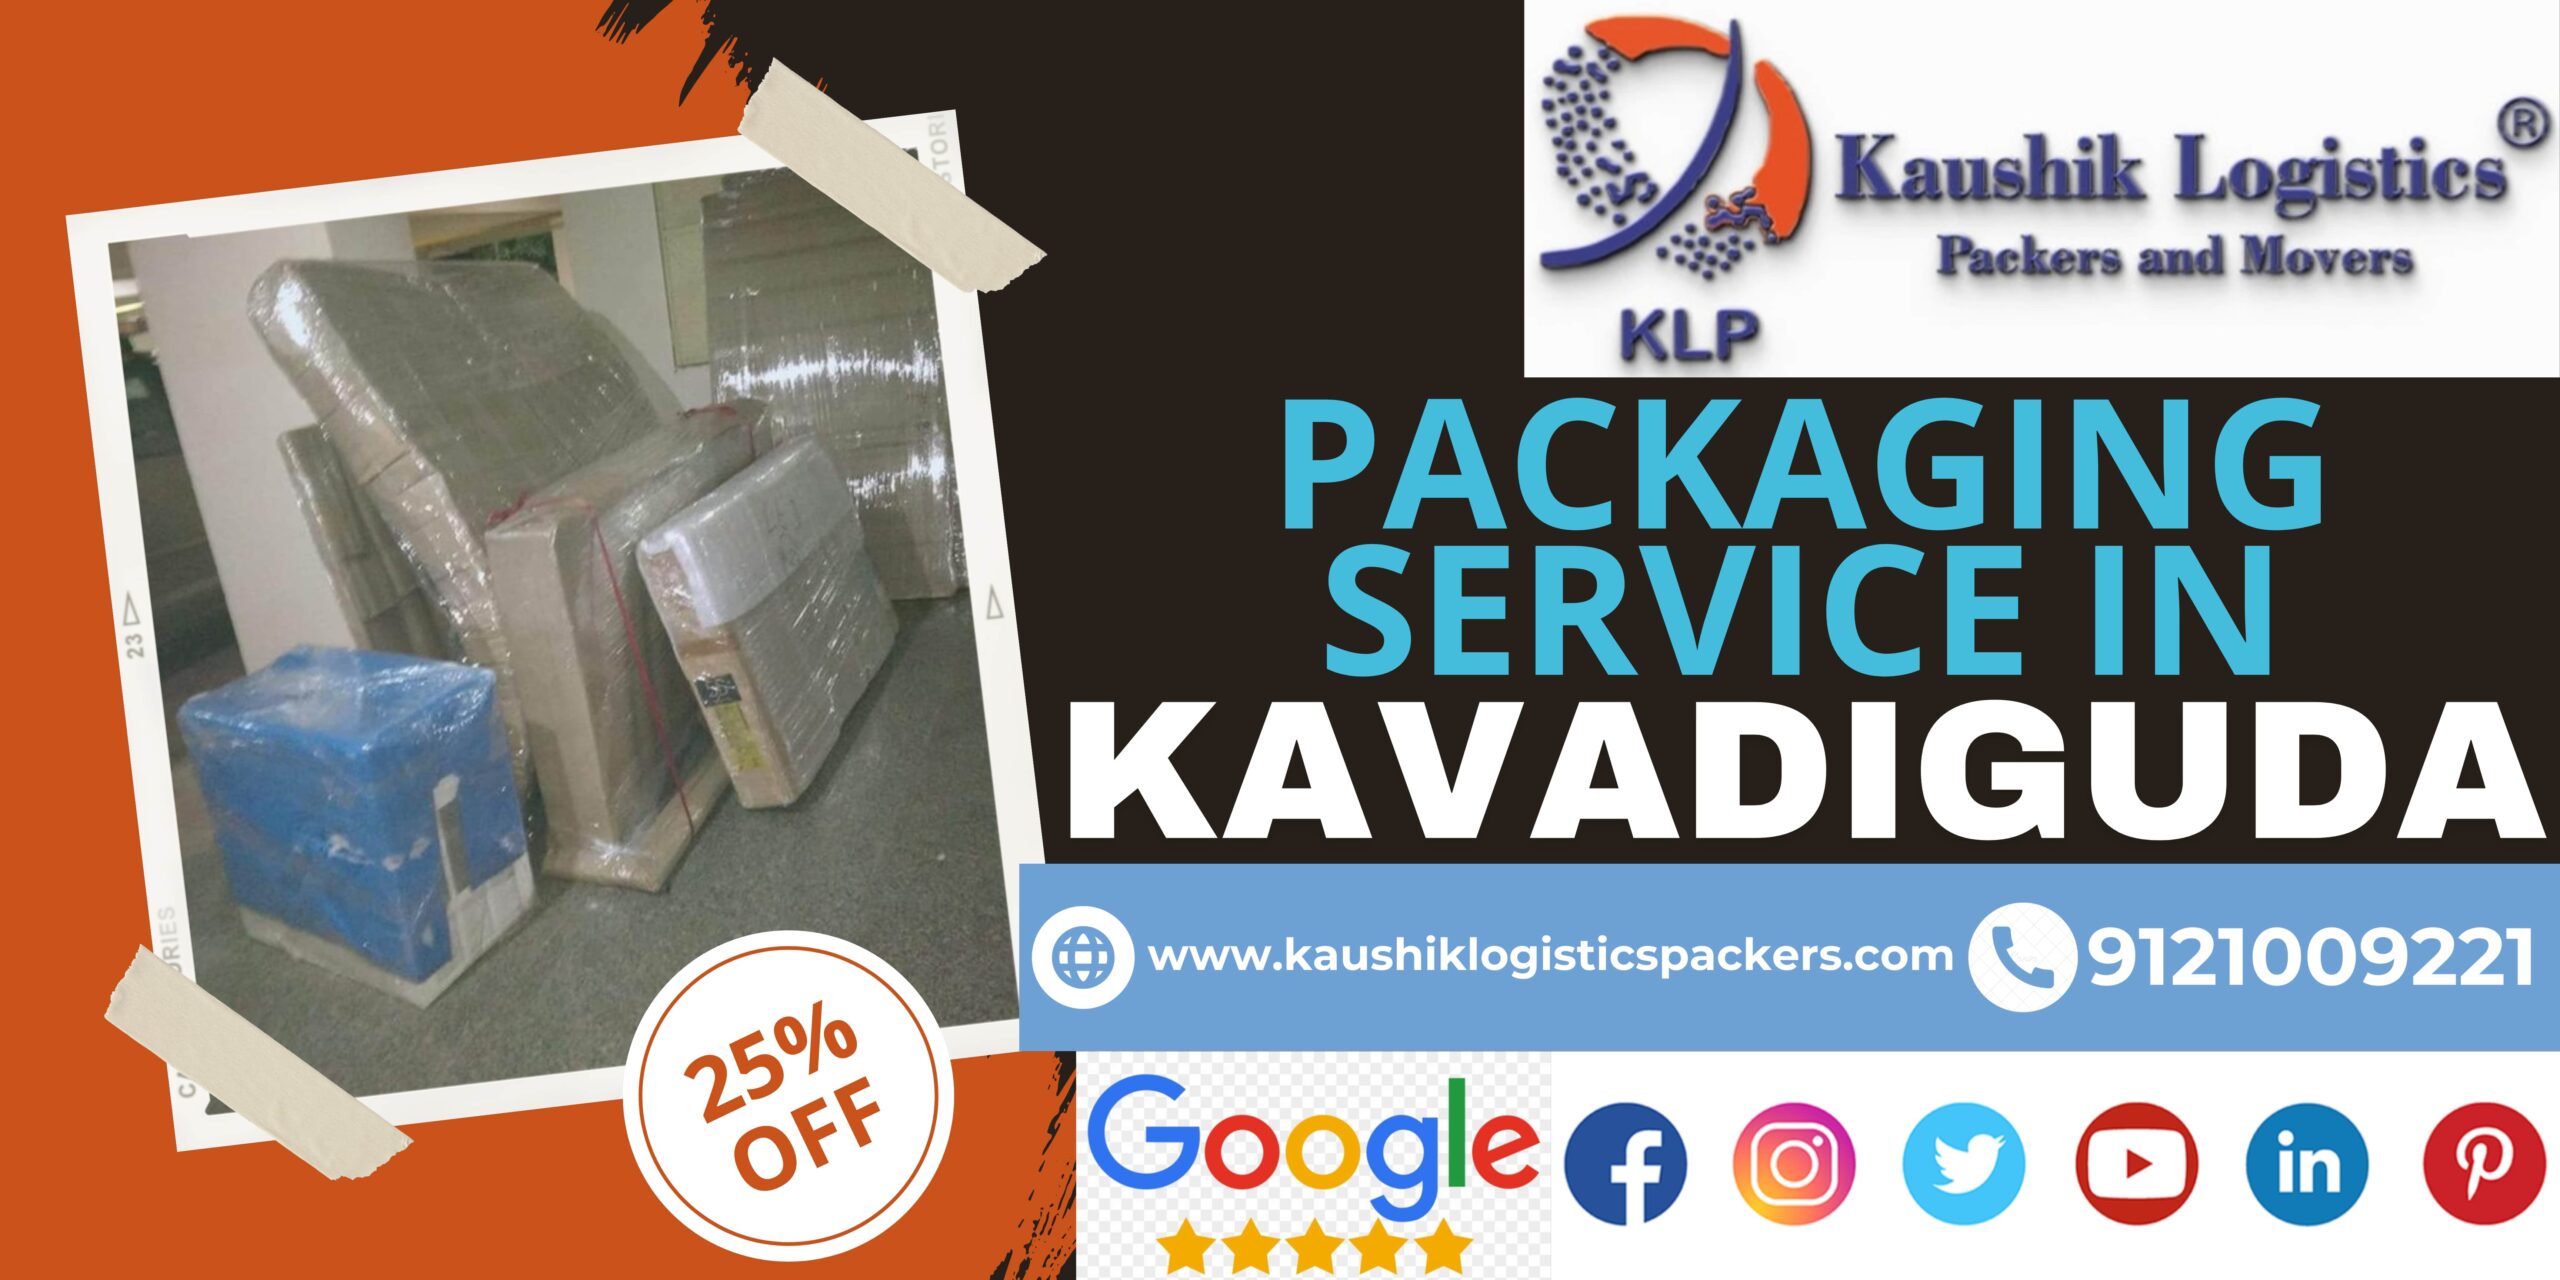 Packers and Movers In Kavadiguda